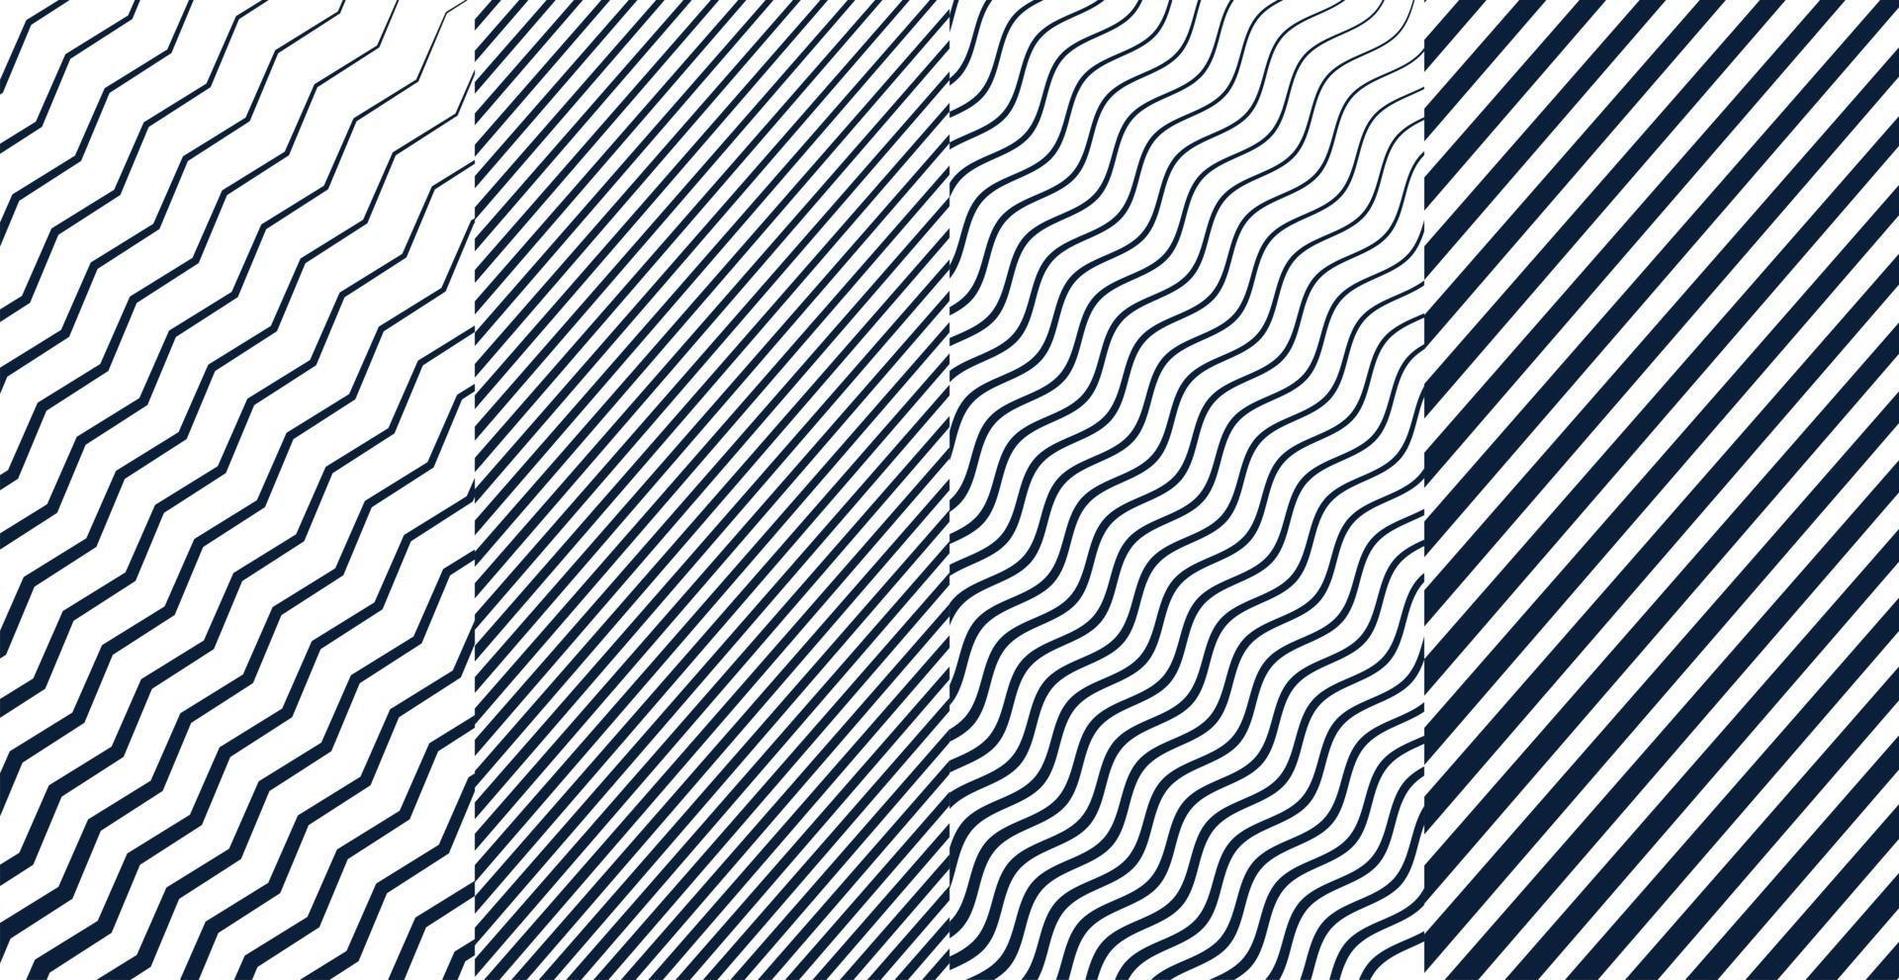 Geometric lines zigzag wavy pattern set of four Free Vector